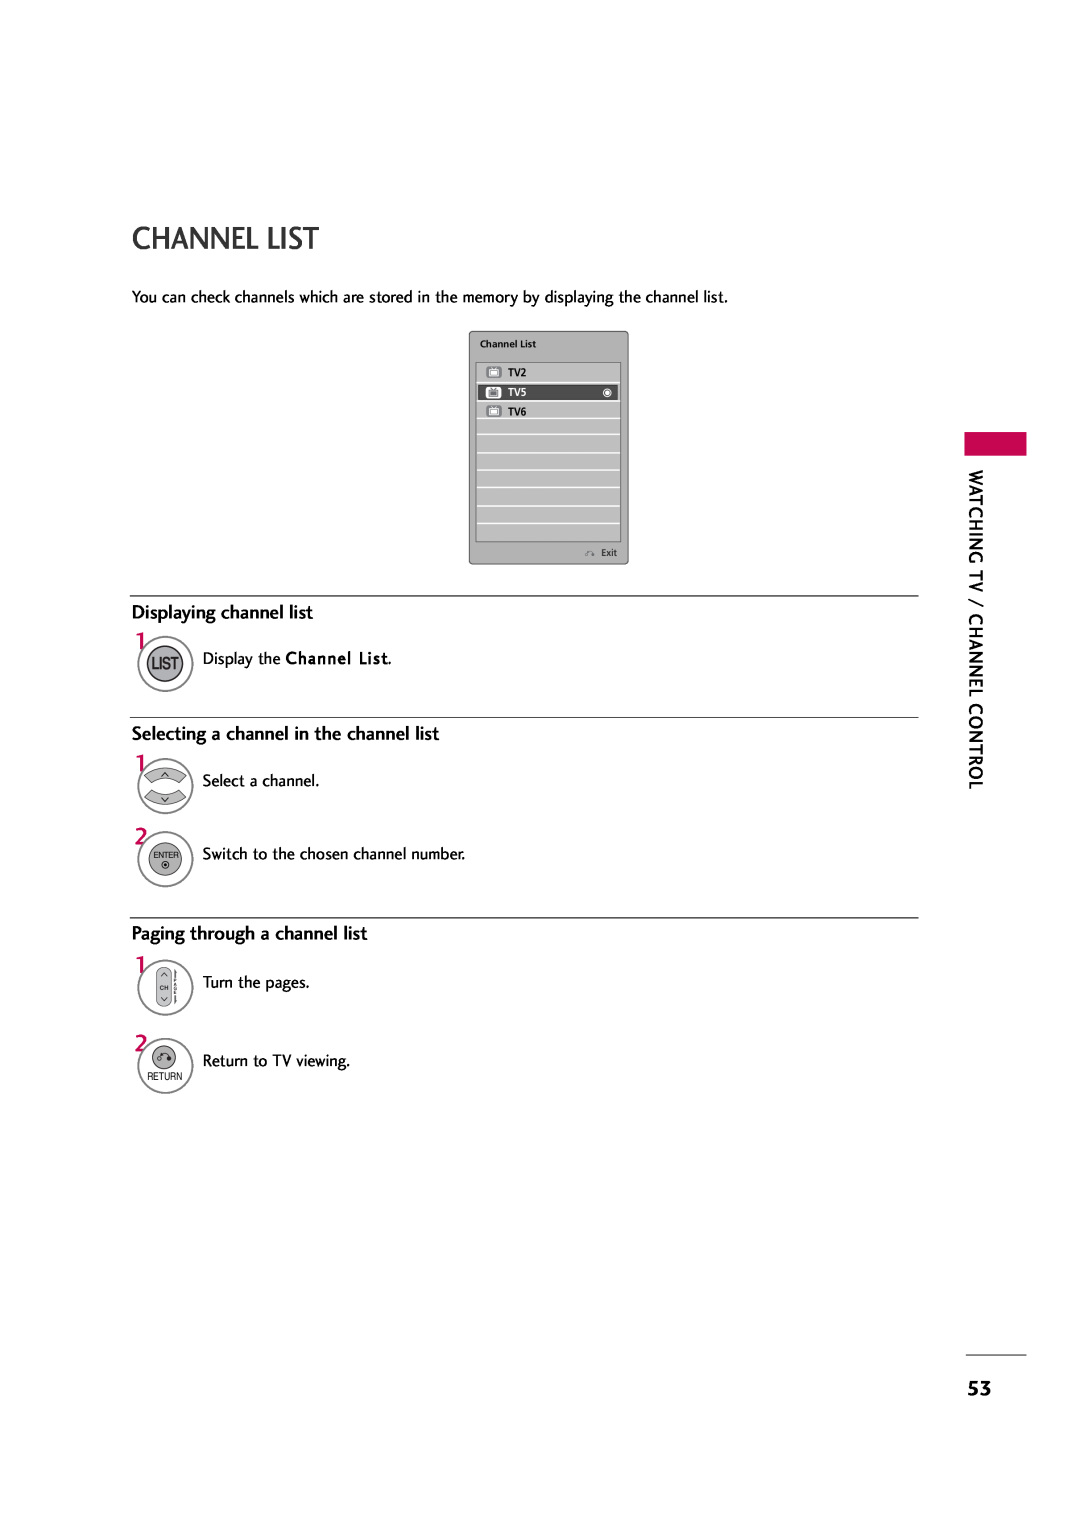 LG Electronics 32LH30FR Channel List, Displaying channel list, Selecting a channel in the channel list, Turn the pages 